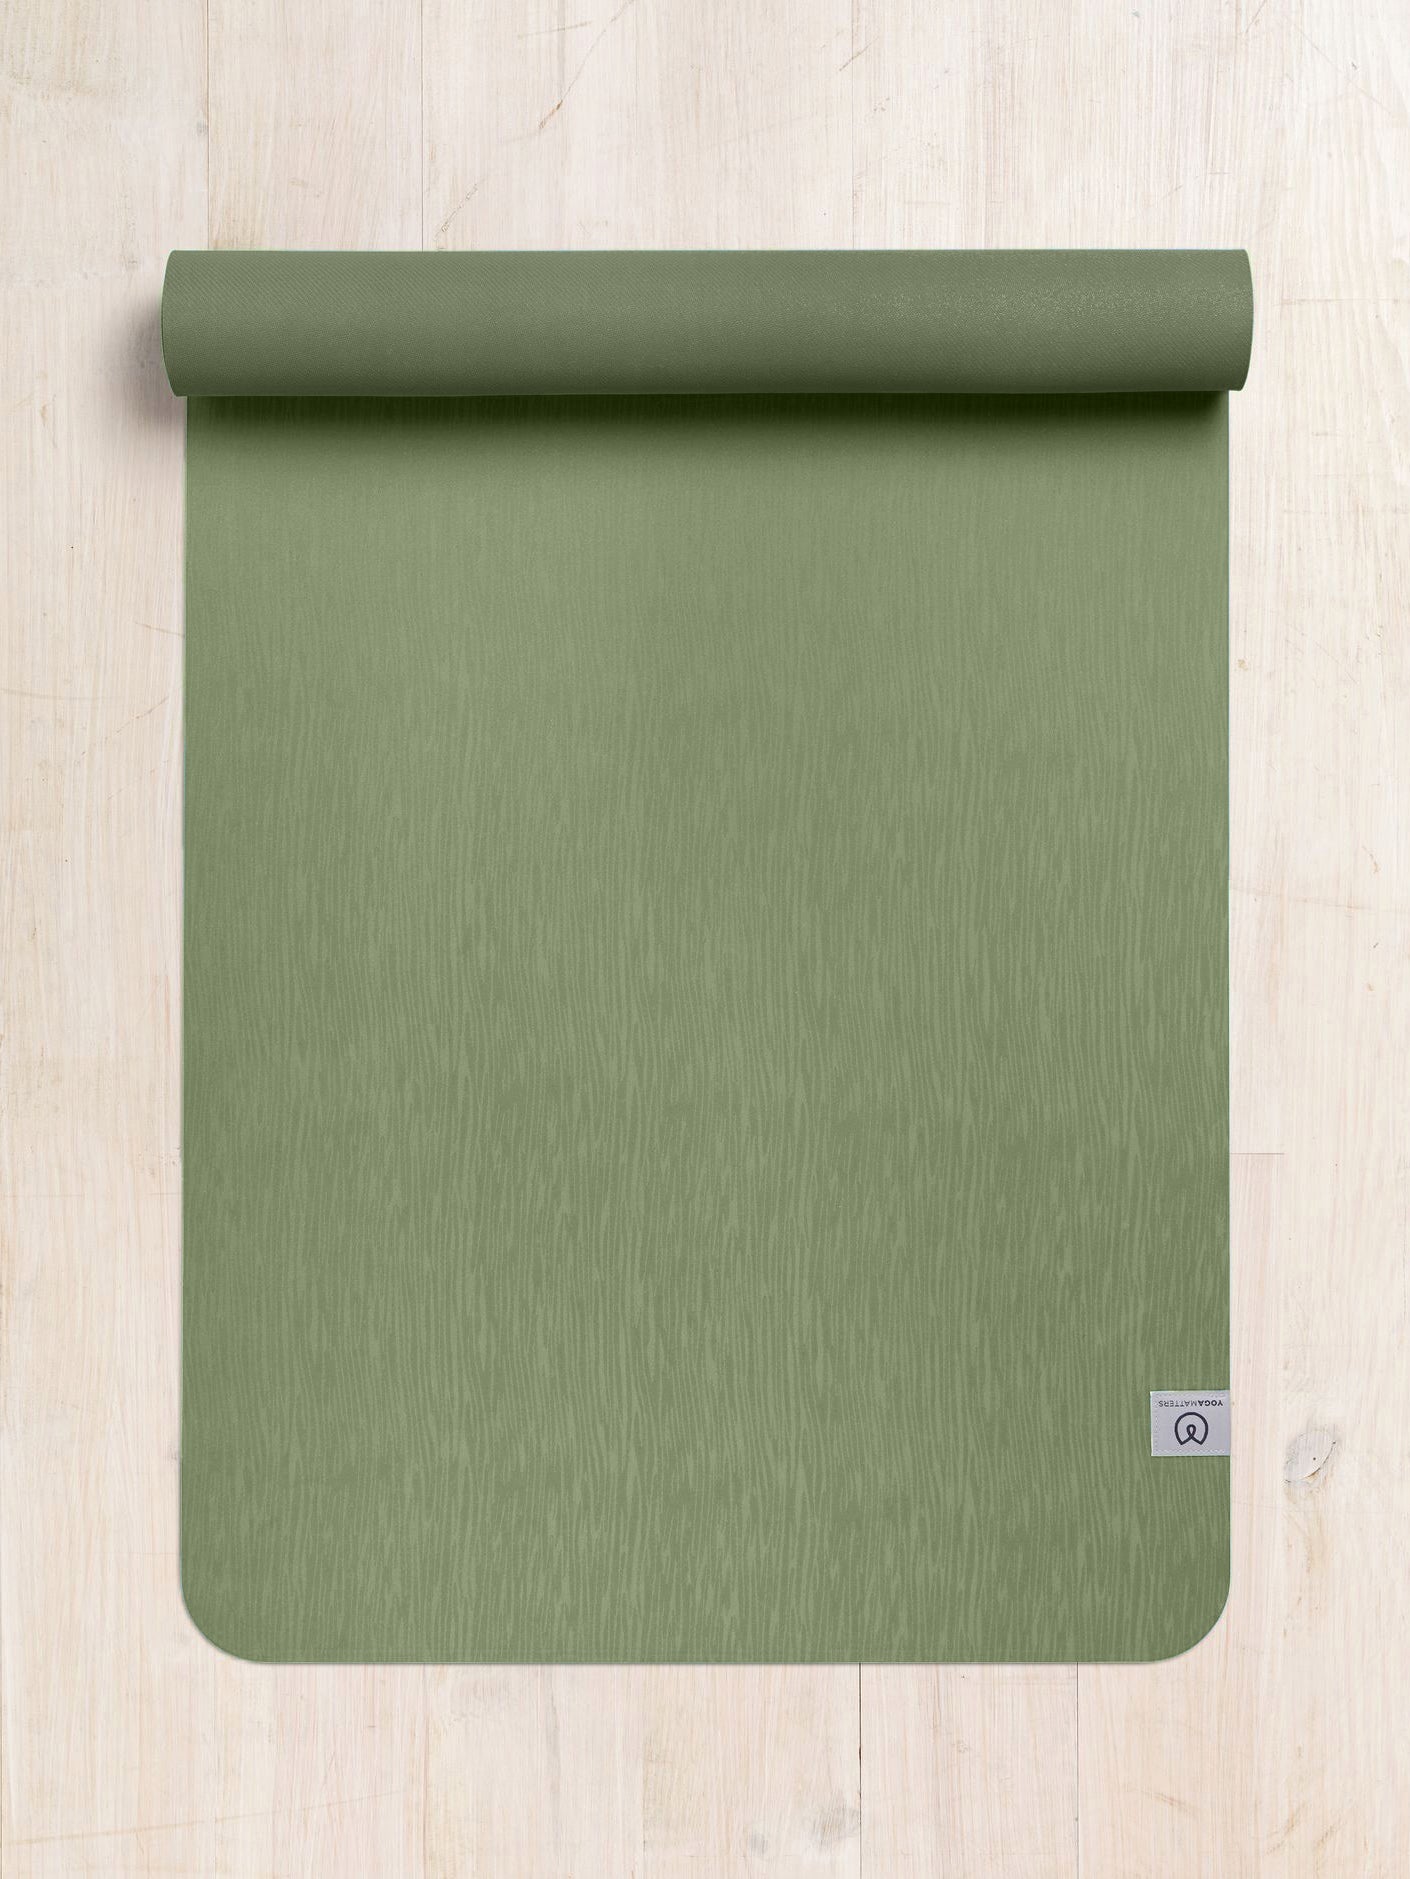 Olive green premium yoga mat rolled halfway with visible texture and brand logo, eco-friendly non-slip exercise mat photographed from overhead on a wooden floor background.